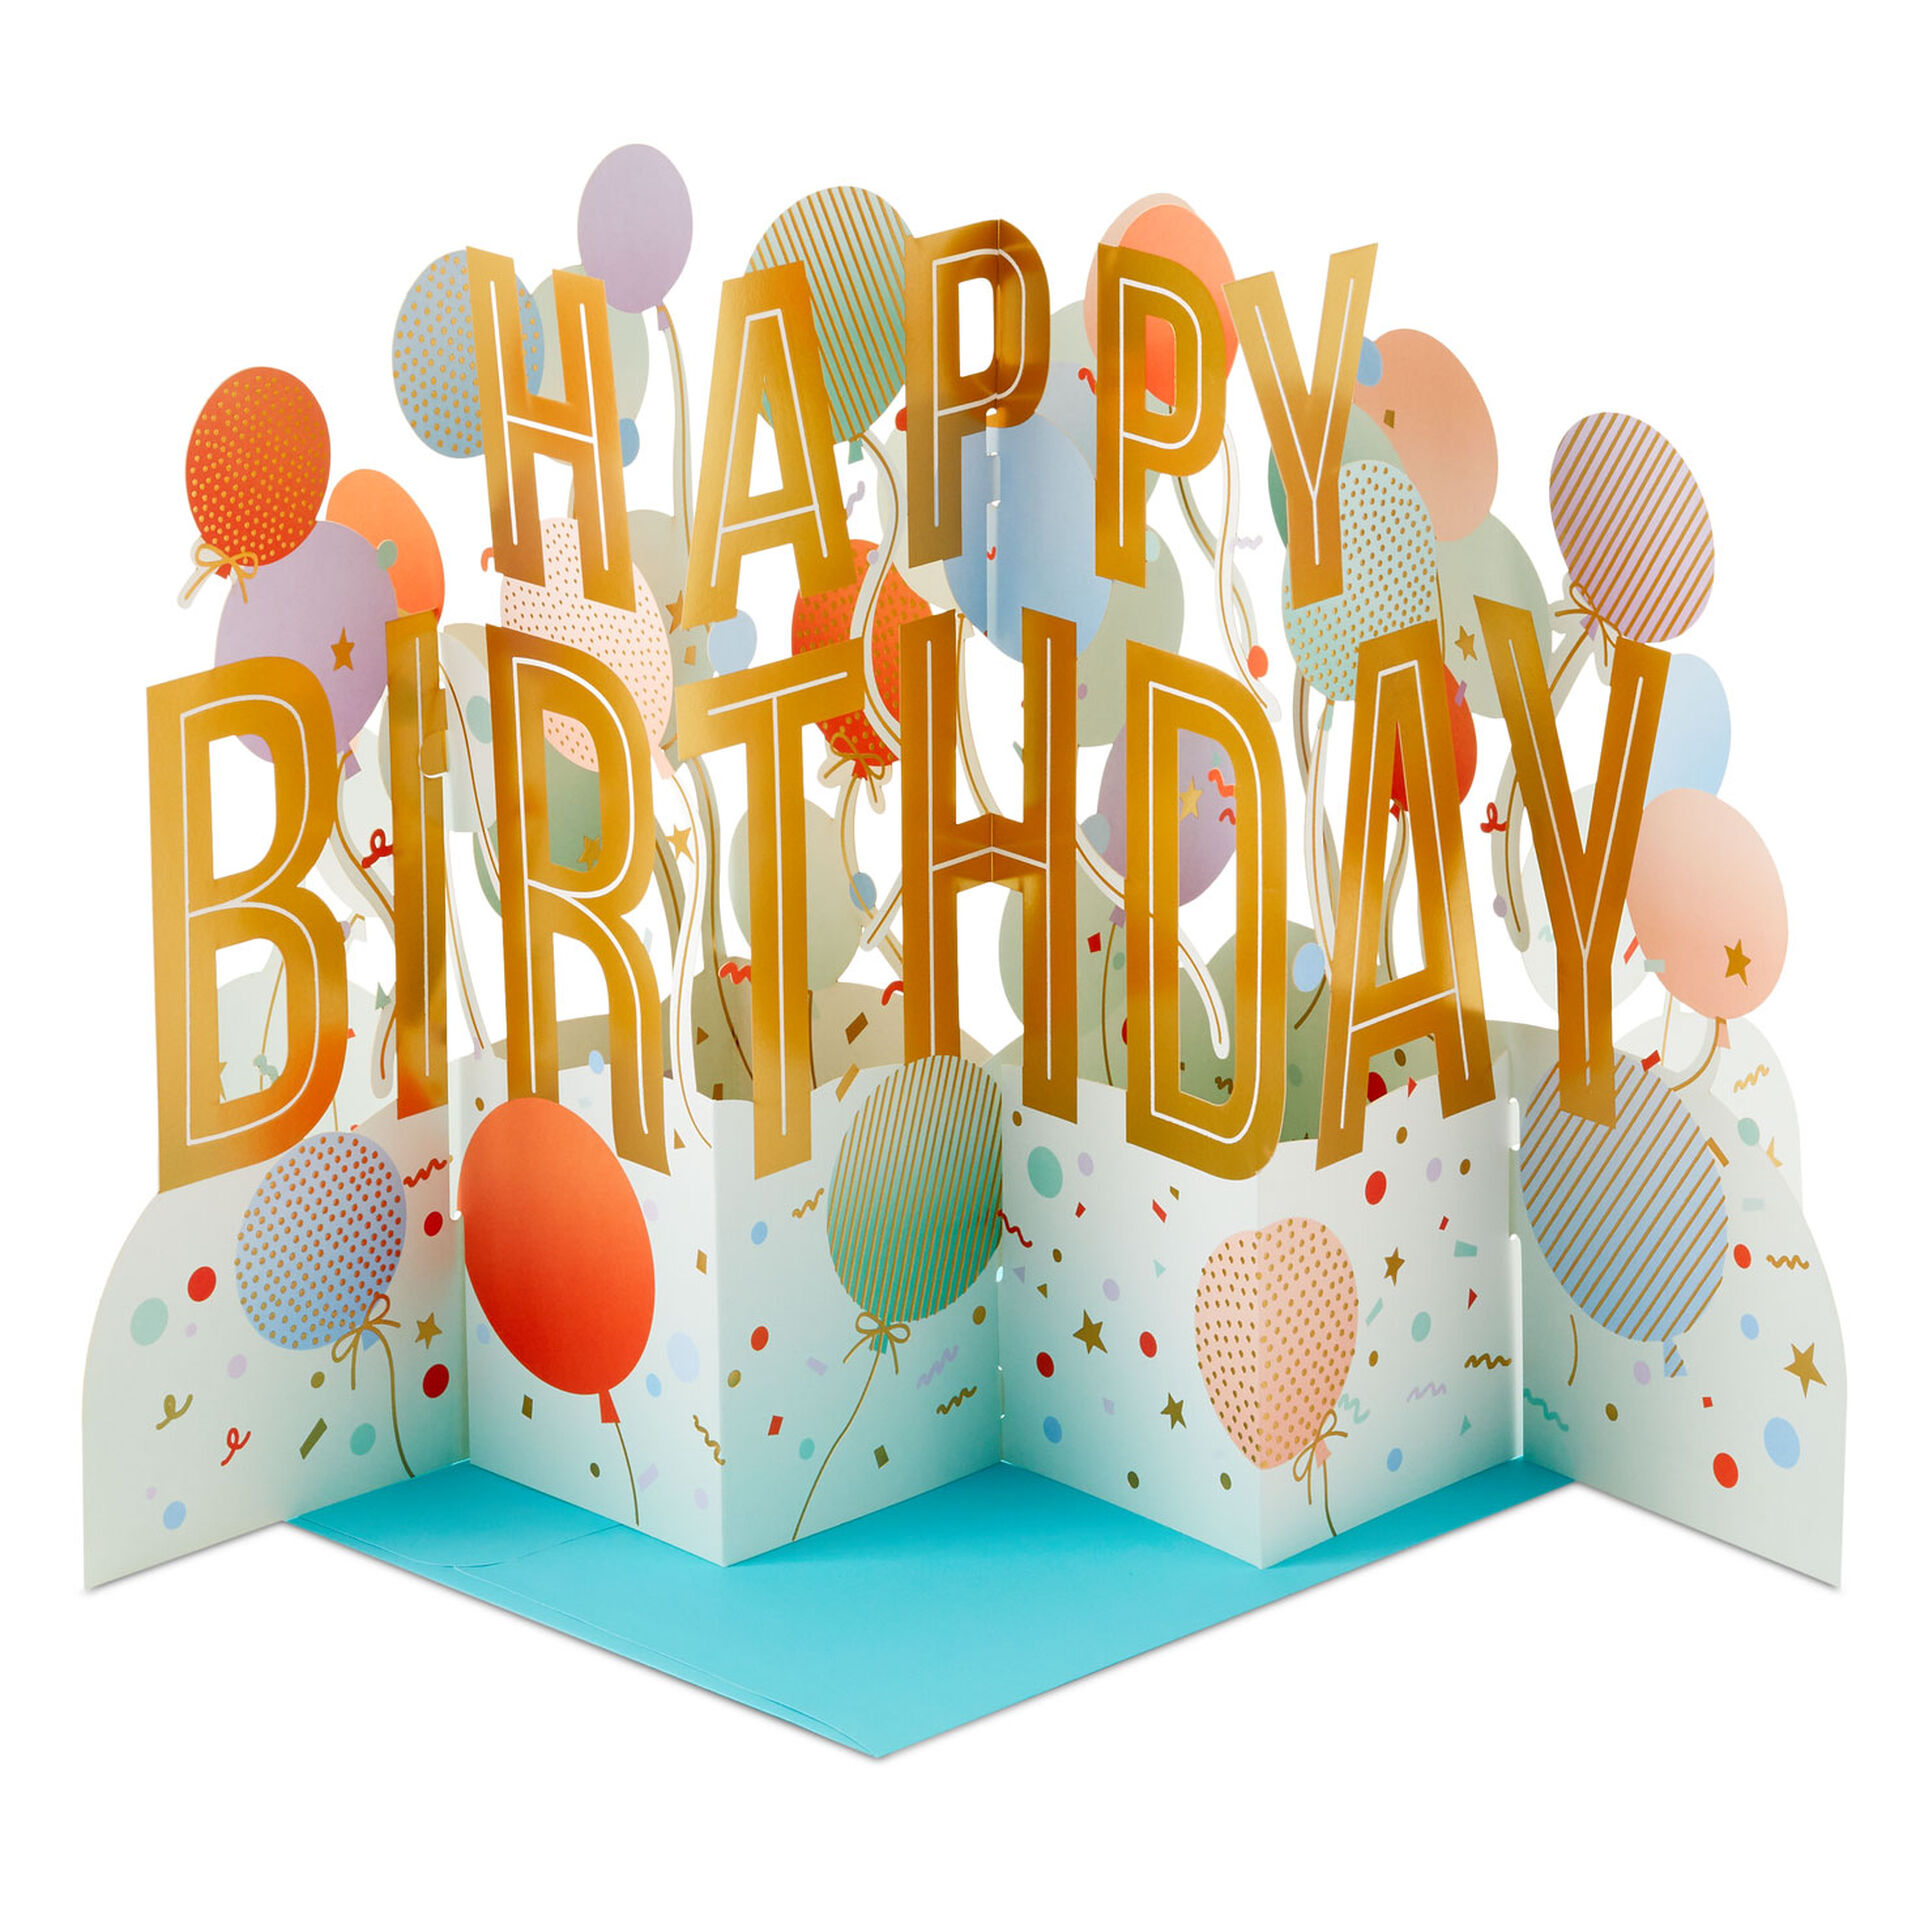 Jumbo-Balloons-and-Confetti-3D-PopUp-Birthday-Card_999WDR1209_01